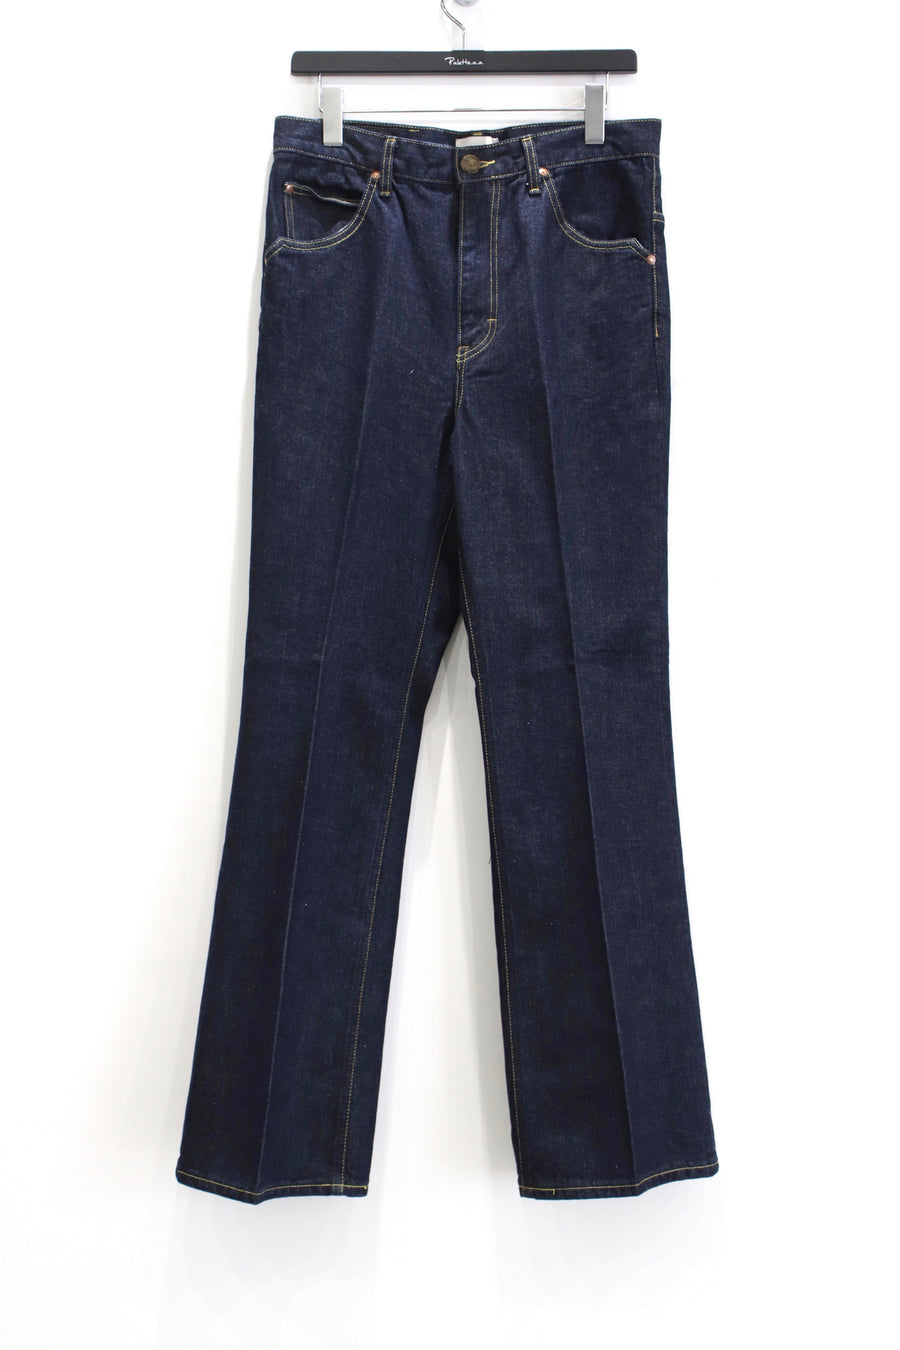 Bed J.W. FORD (Bedford) Mail Order of 22AW FLARE DENIM PANTS ...